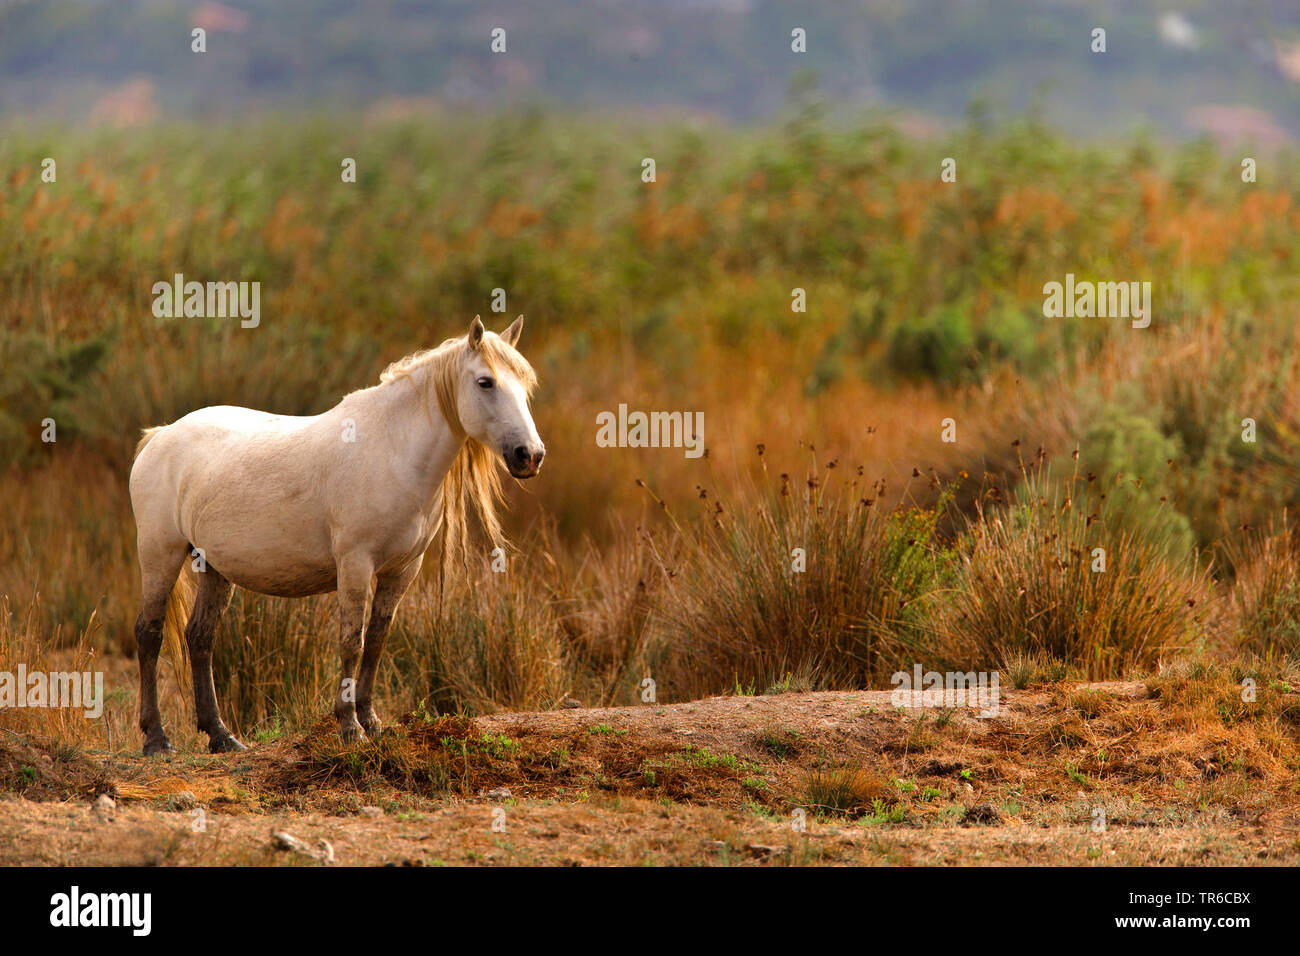 Camargue horse (Equus przewalskii f. caballus), standing in a stud farm in the wild, Spain Stock Photo